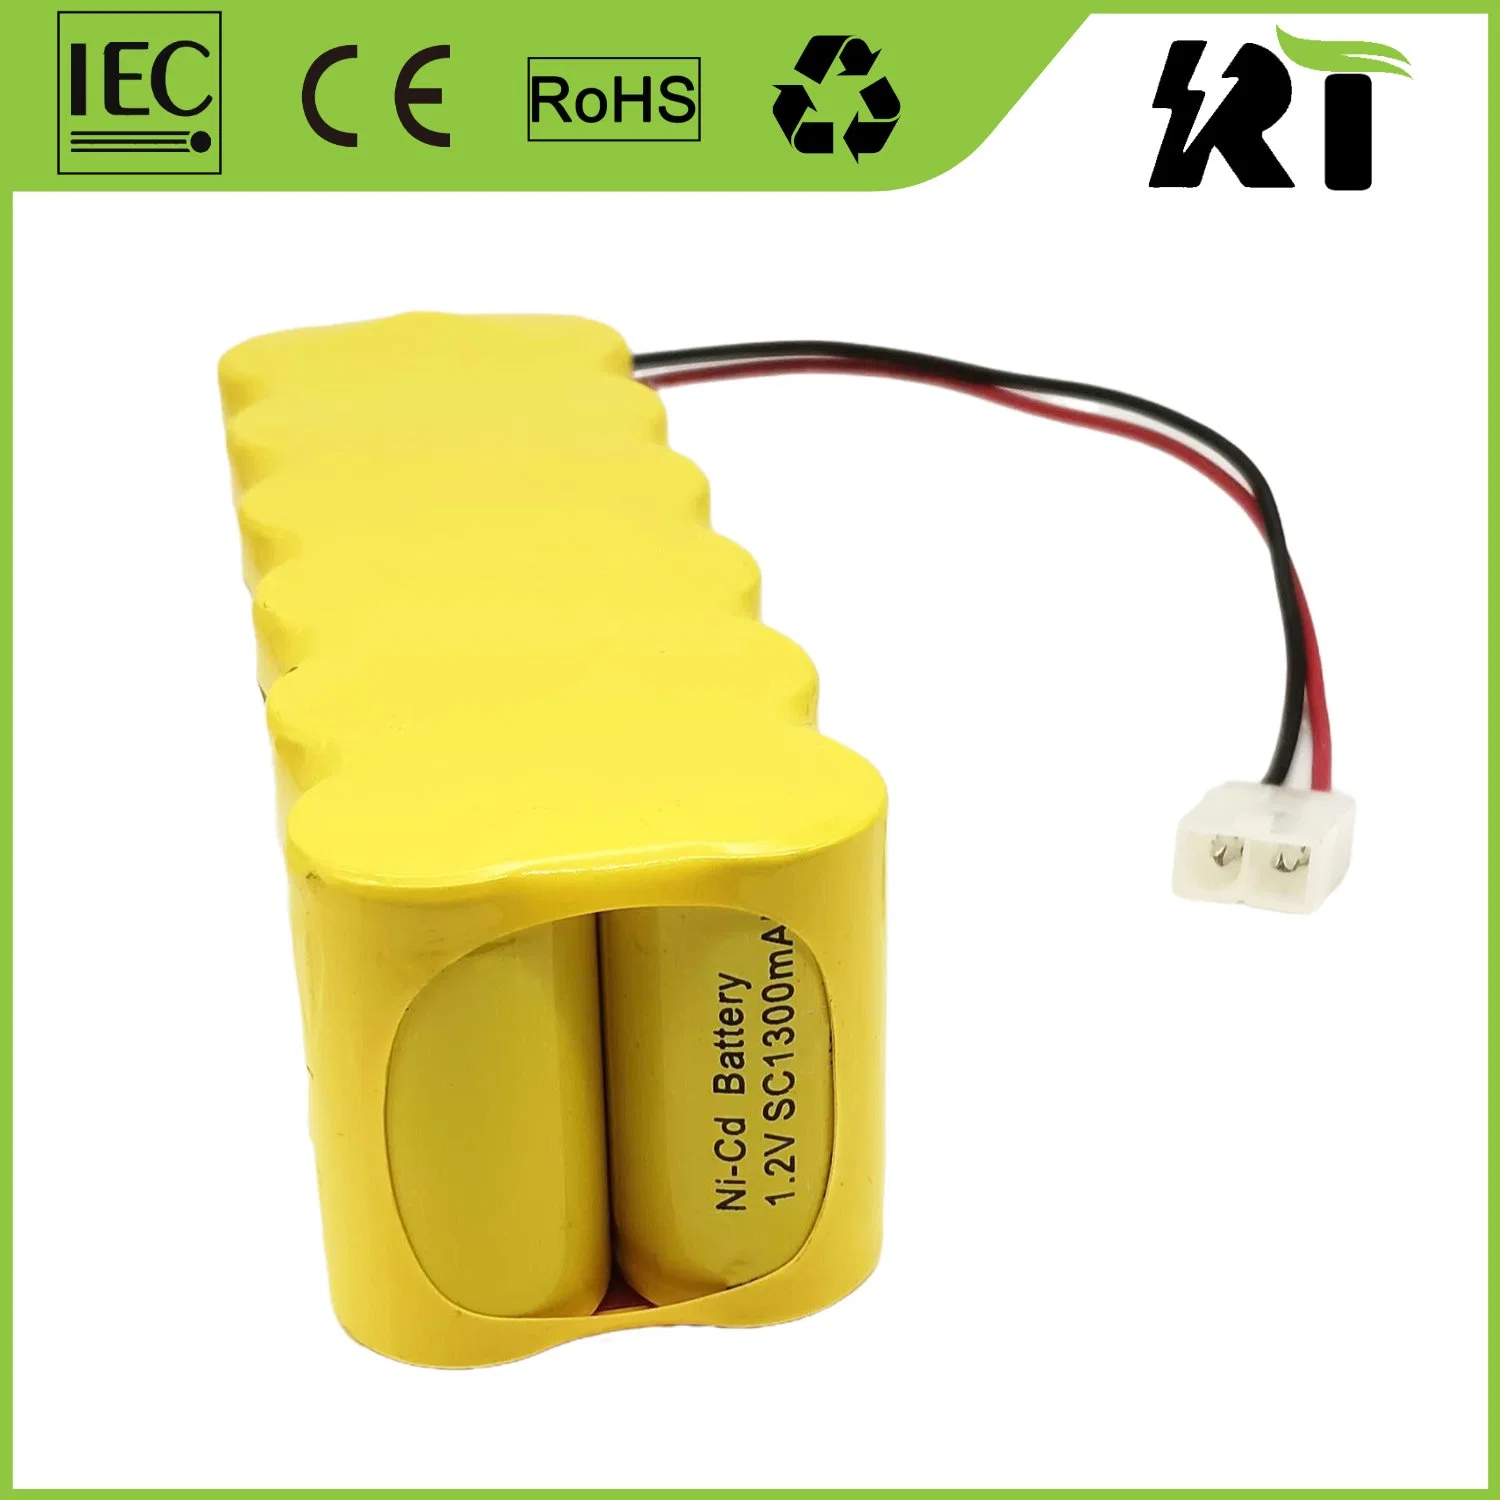 Rt 1.2V NiCd 4/5 Sc Rechargeable Battery Ni CD Sub C Size 1300mAh Batteries with Tab Sub-C Nickel Cadmium Batterie 1.2V Wholesale